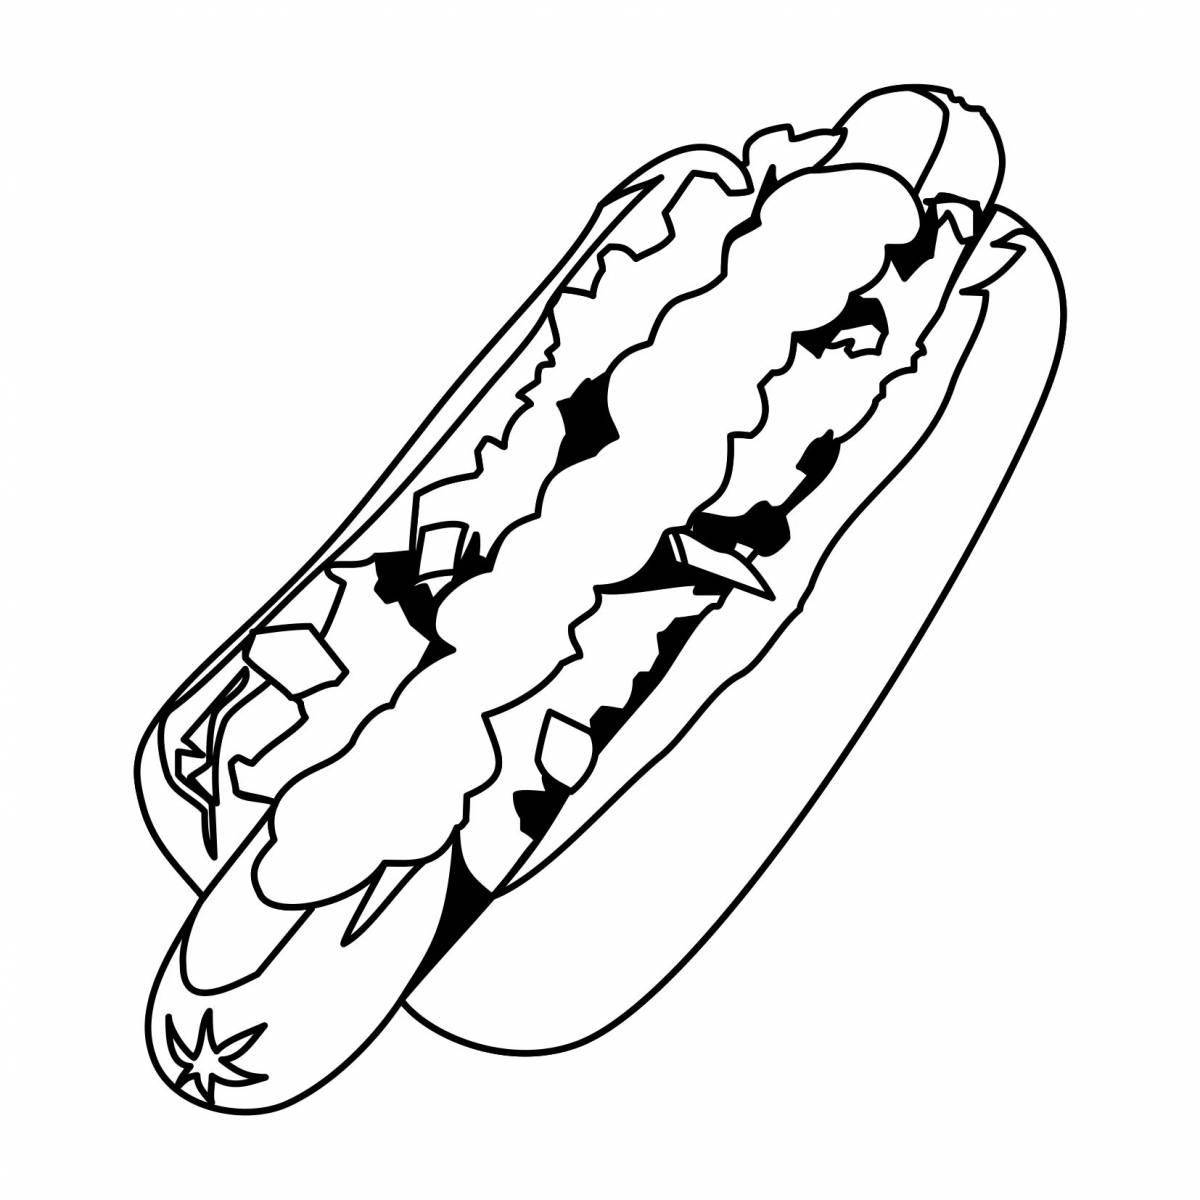 Coloring page adorable sausages